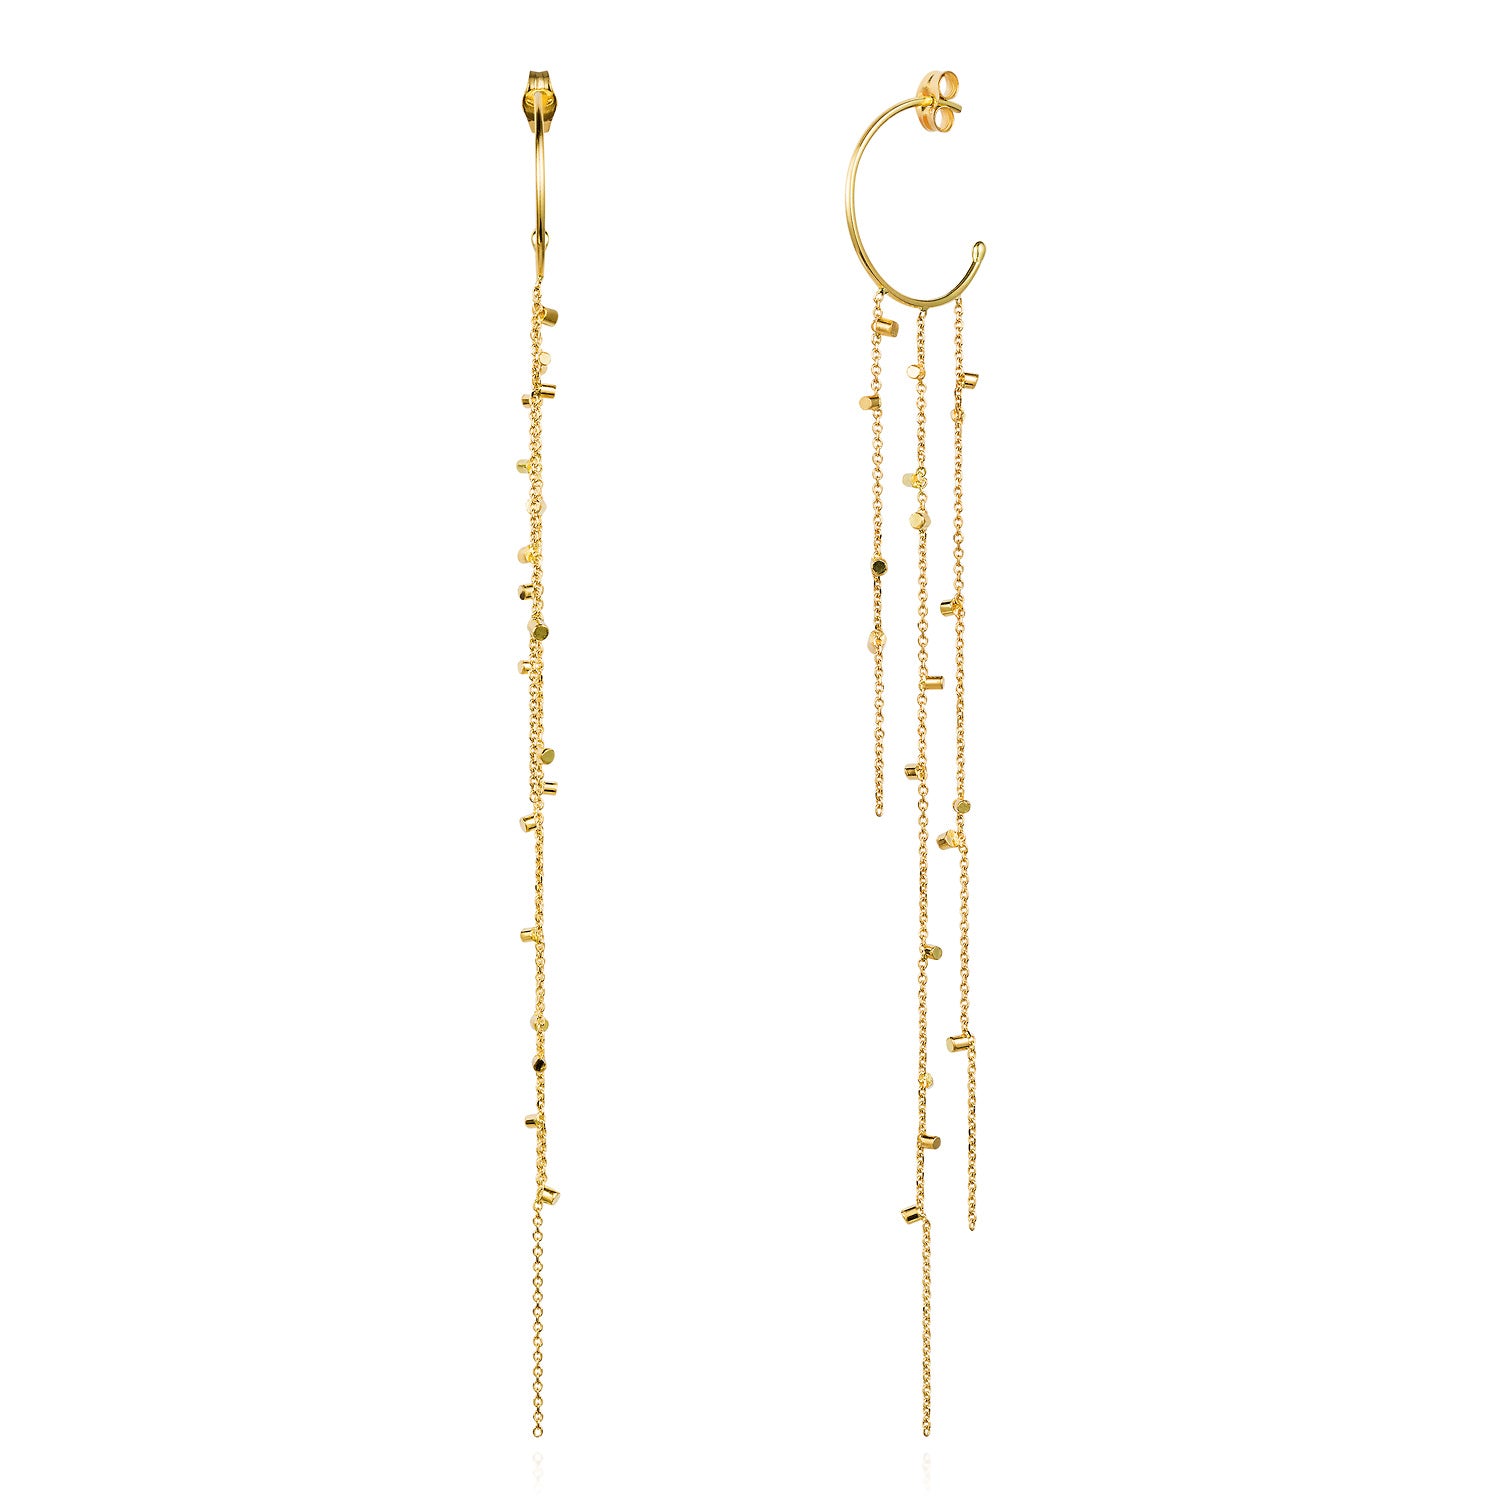 These fabulous hoop earrings are part of our Gold Dust Collection. The Hoops have three strands of 18ct yellow fine chain sprinkled with a shimmering of gold embellishments